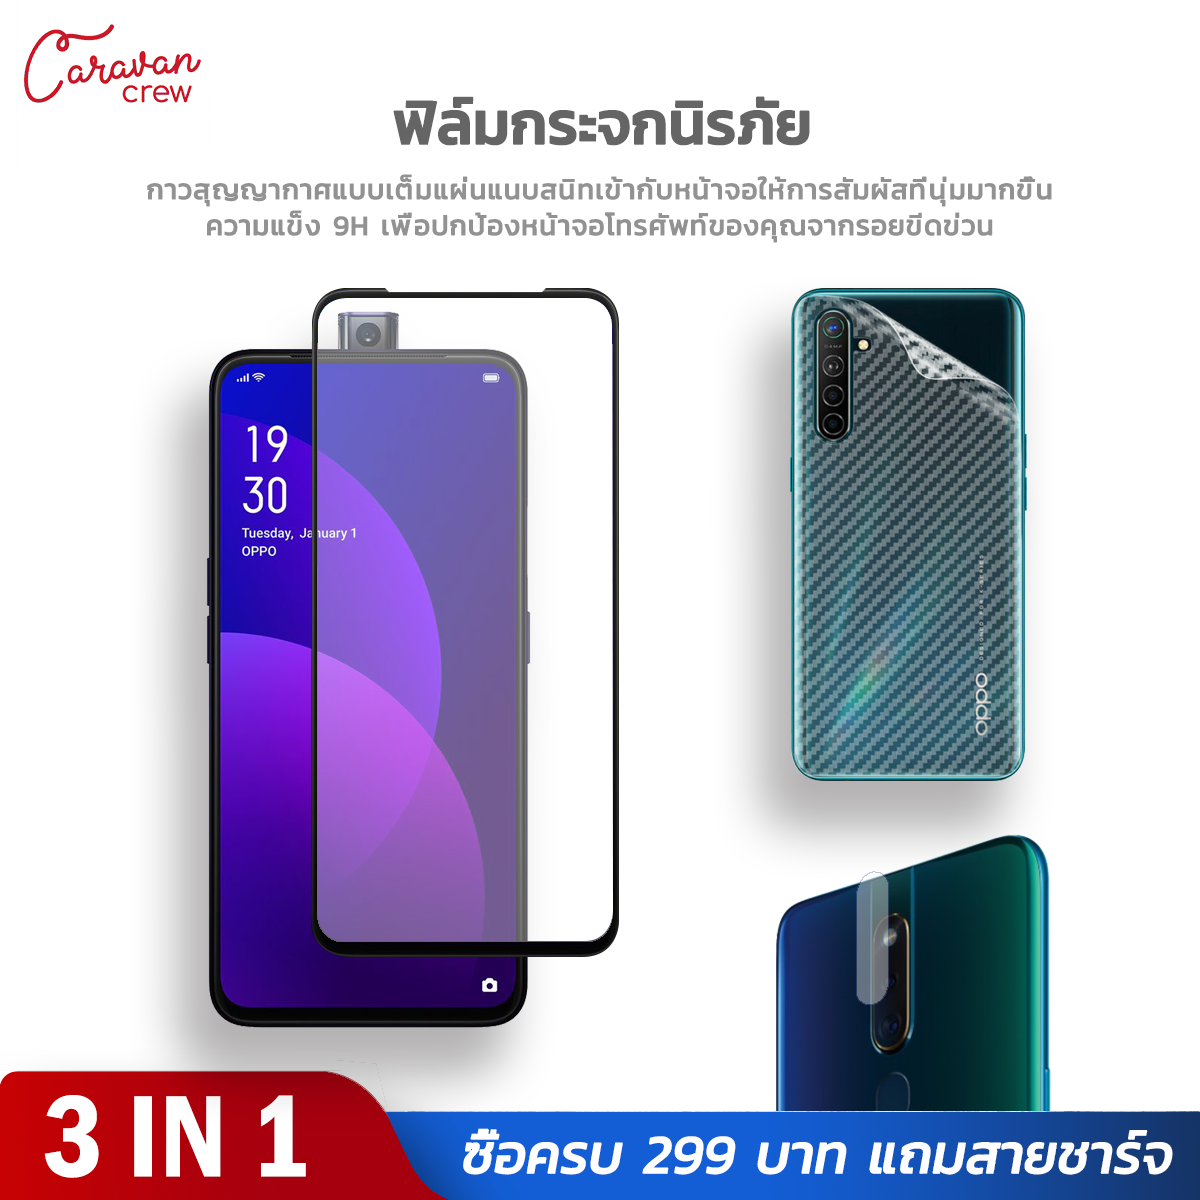 (3 IN 1) Oppo A1k A5 2020 A7 A9 2020 A5S A83 F7 F9 F11 F11 PRO Reno 2 F Screen Protector Film Back Protector Lens Protector ฟิล์มกระจกนิรภัย ฟิล์มกระจก Tempered Glass ฟิล์มกระจกเต็มจอ